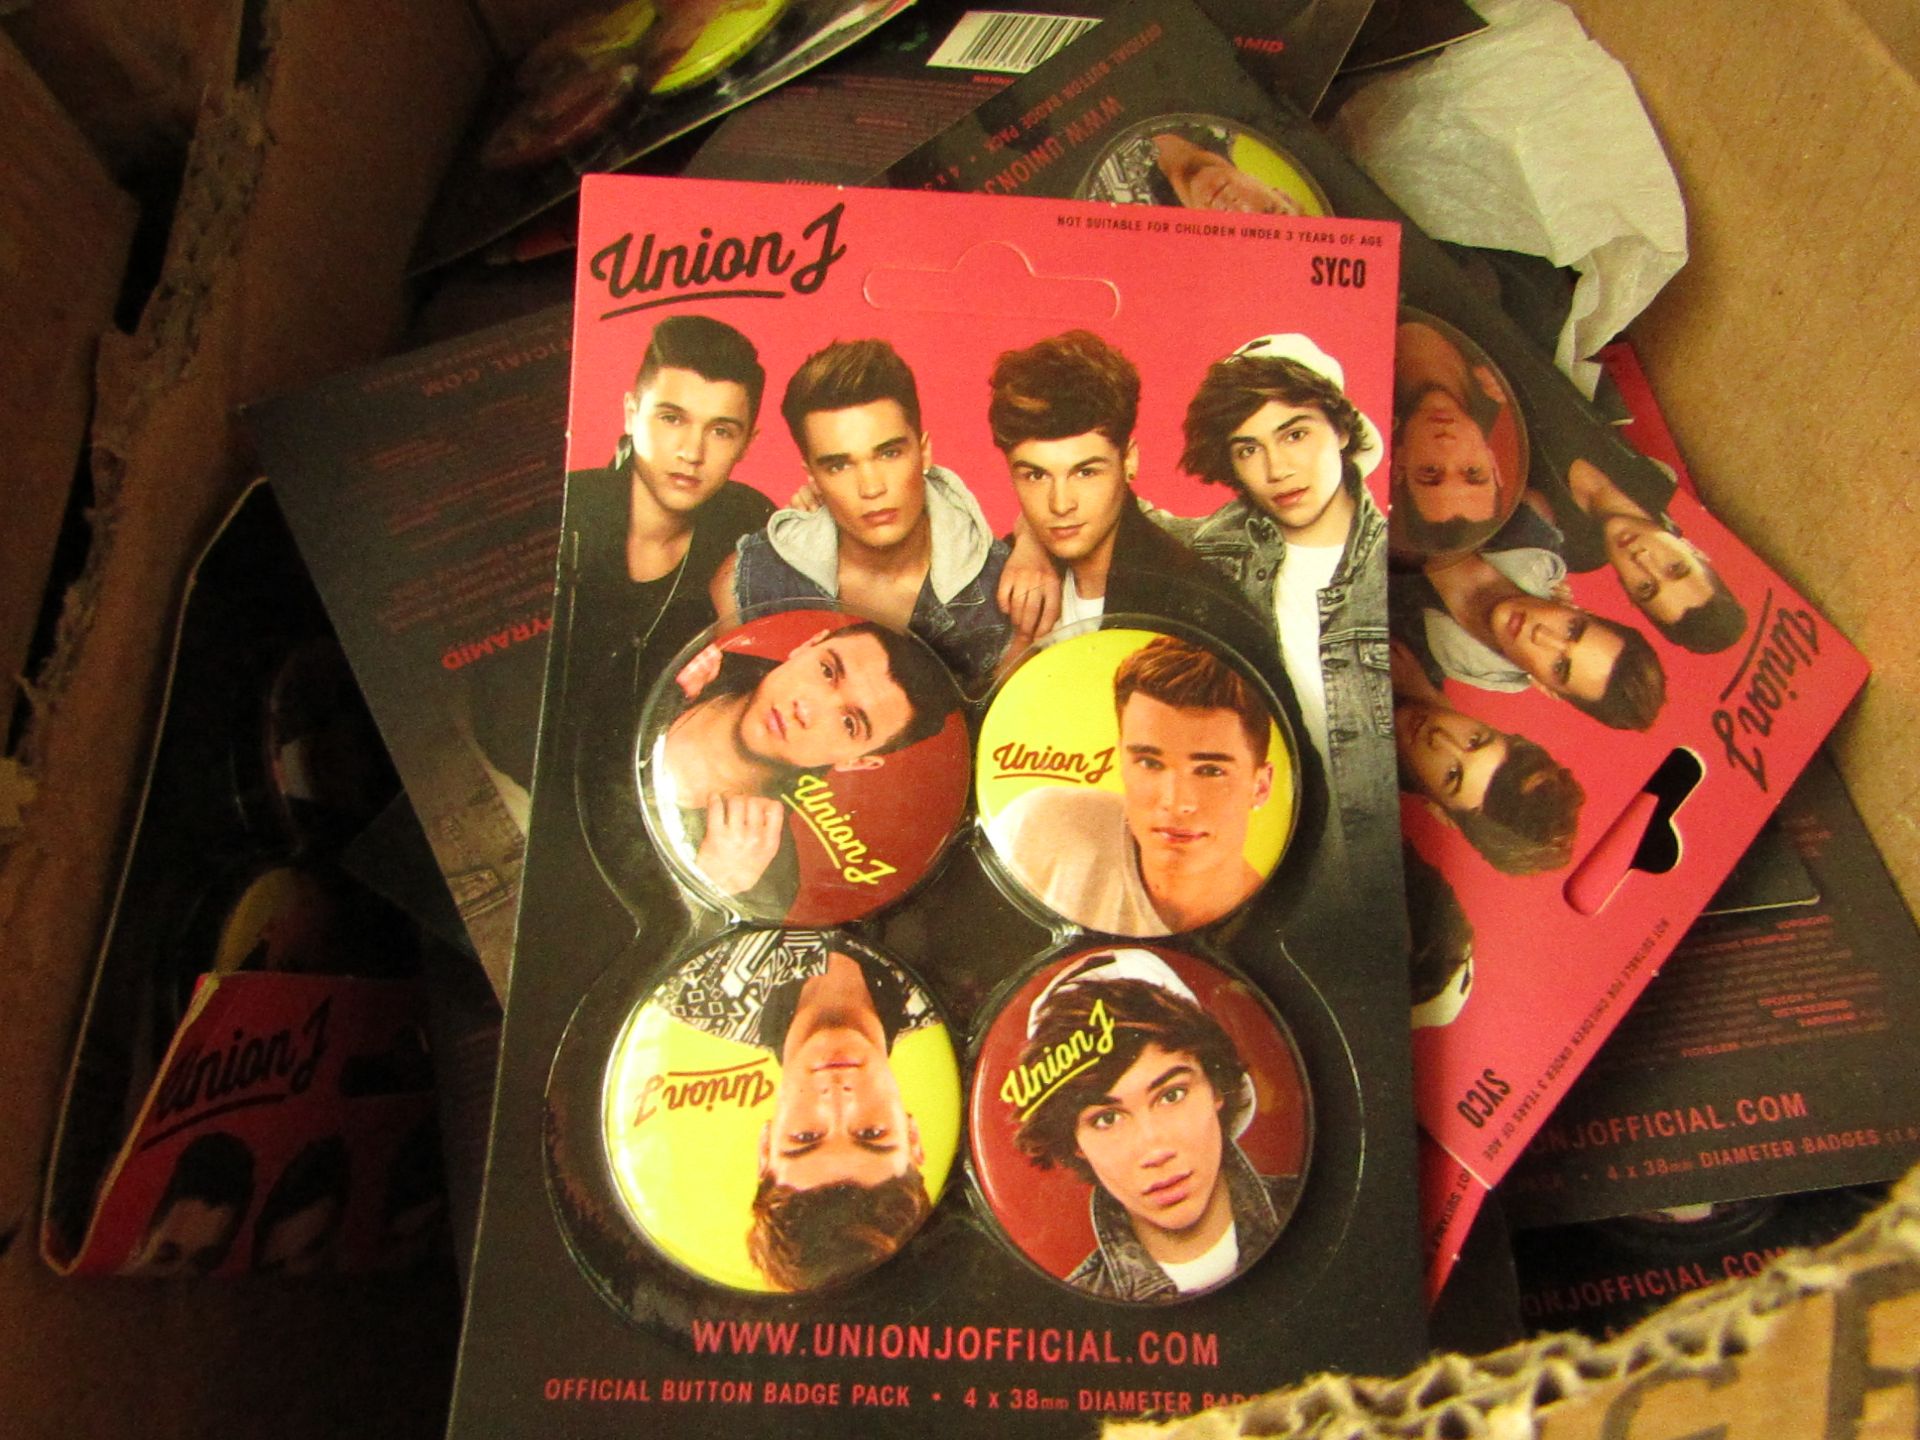 3x Union J - Button Badge Pack - New & Packaged.